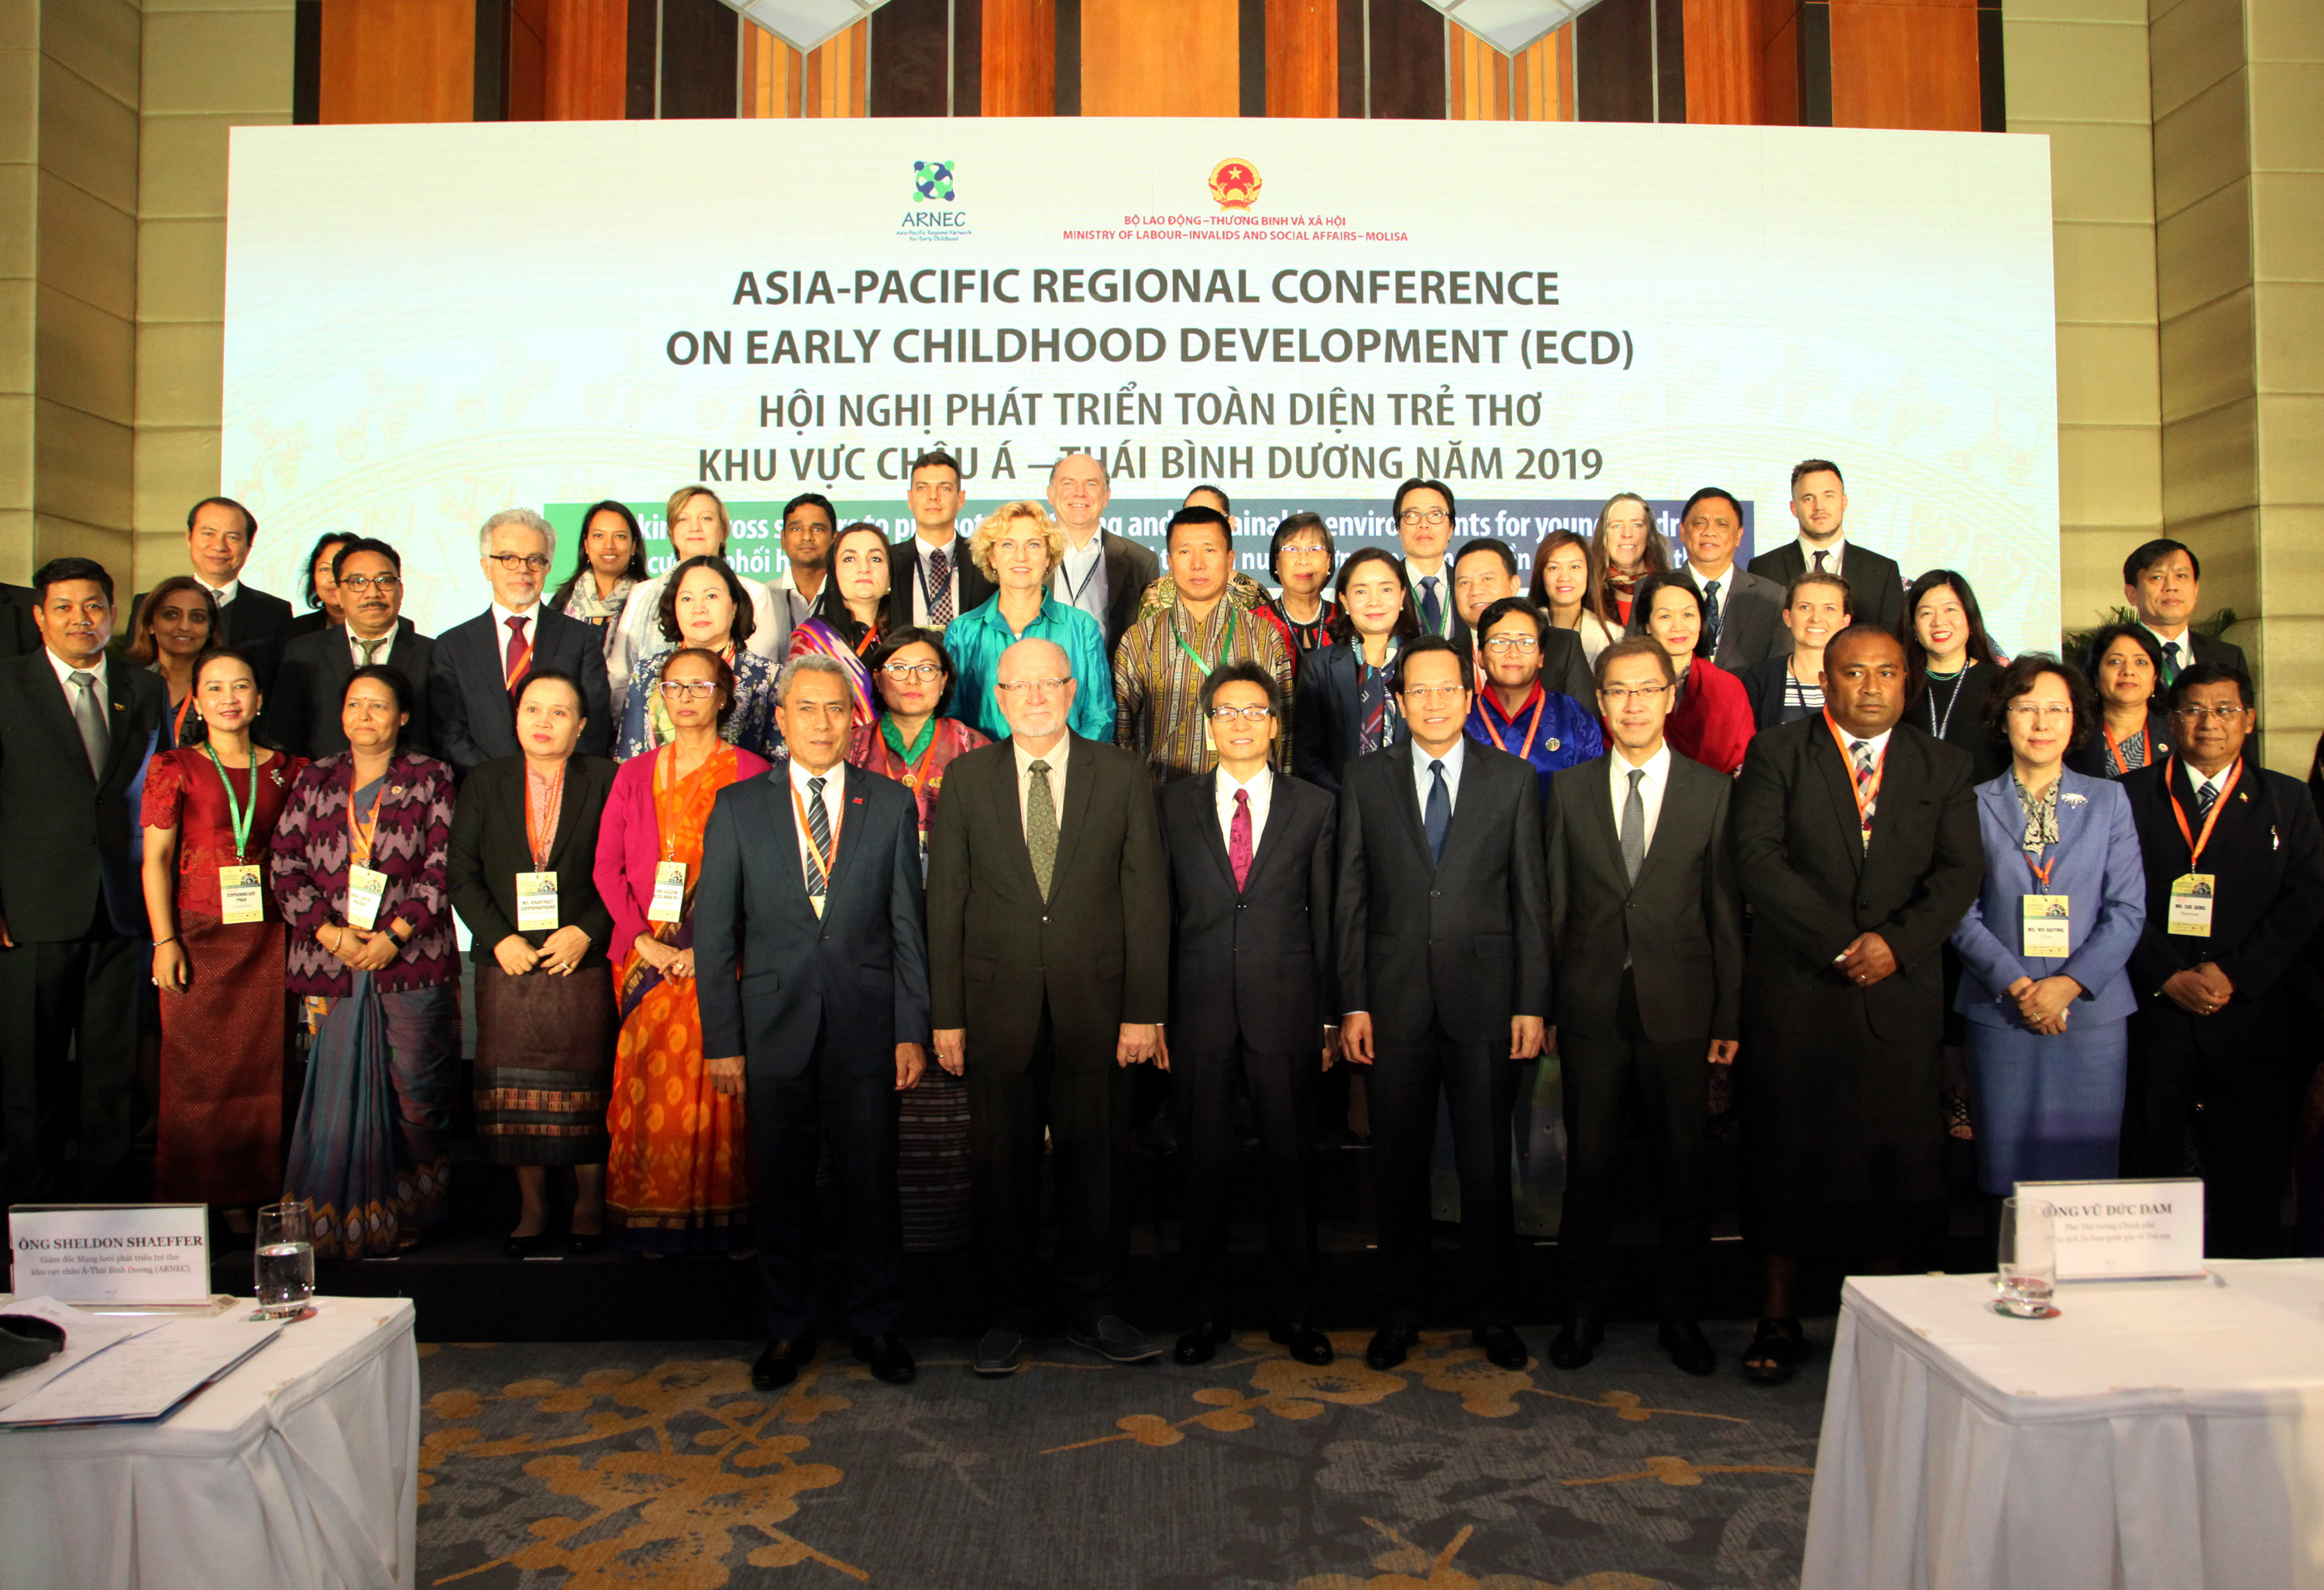 Attendees pose for a group photo at the Asia-Pacific Regional Conference on Early Childhood Development in Hanoi on December 4, 2019 in this supplied photo.